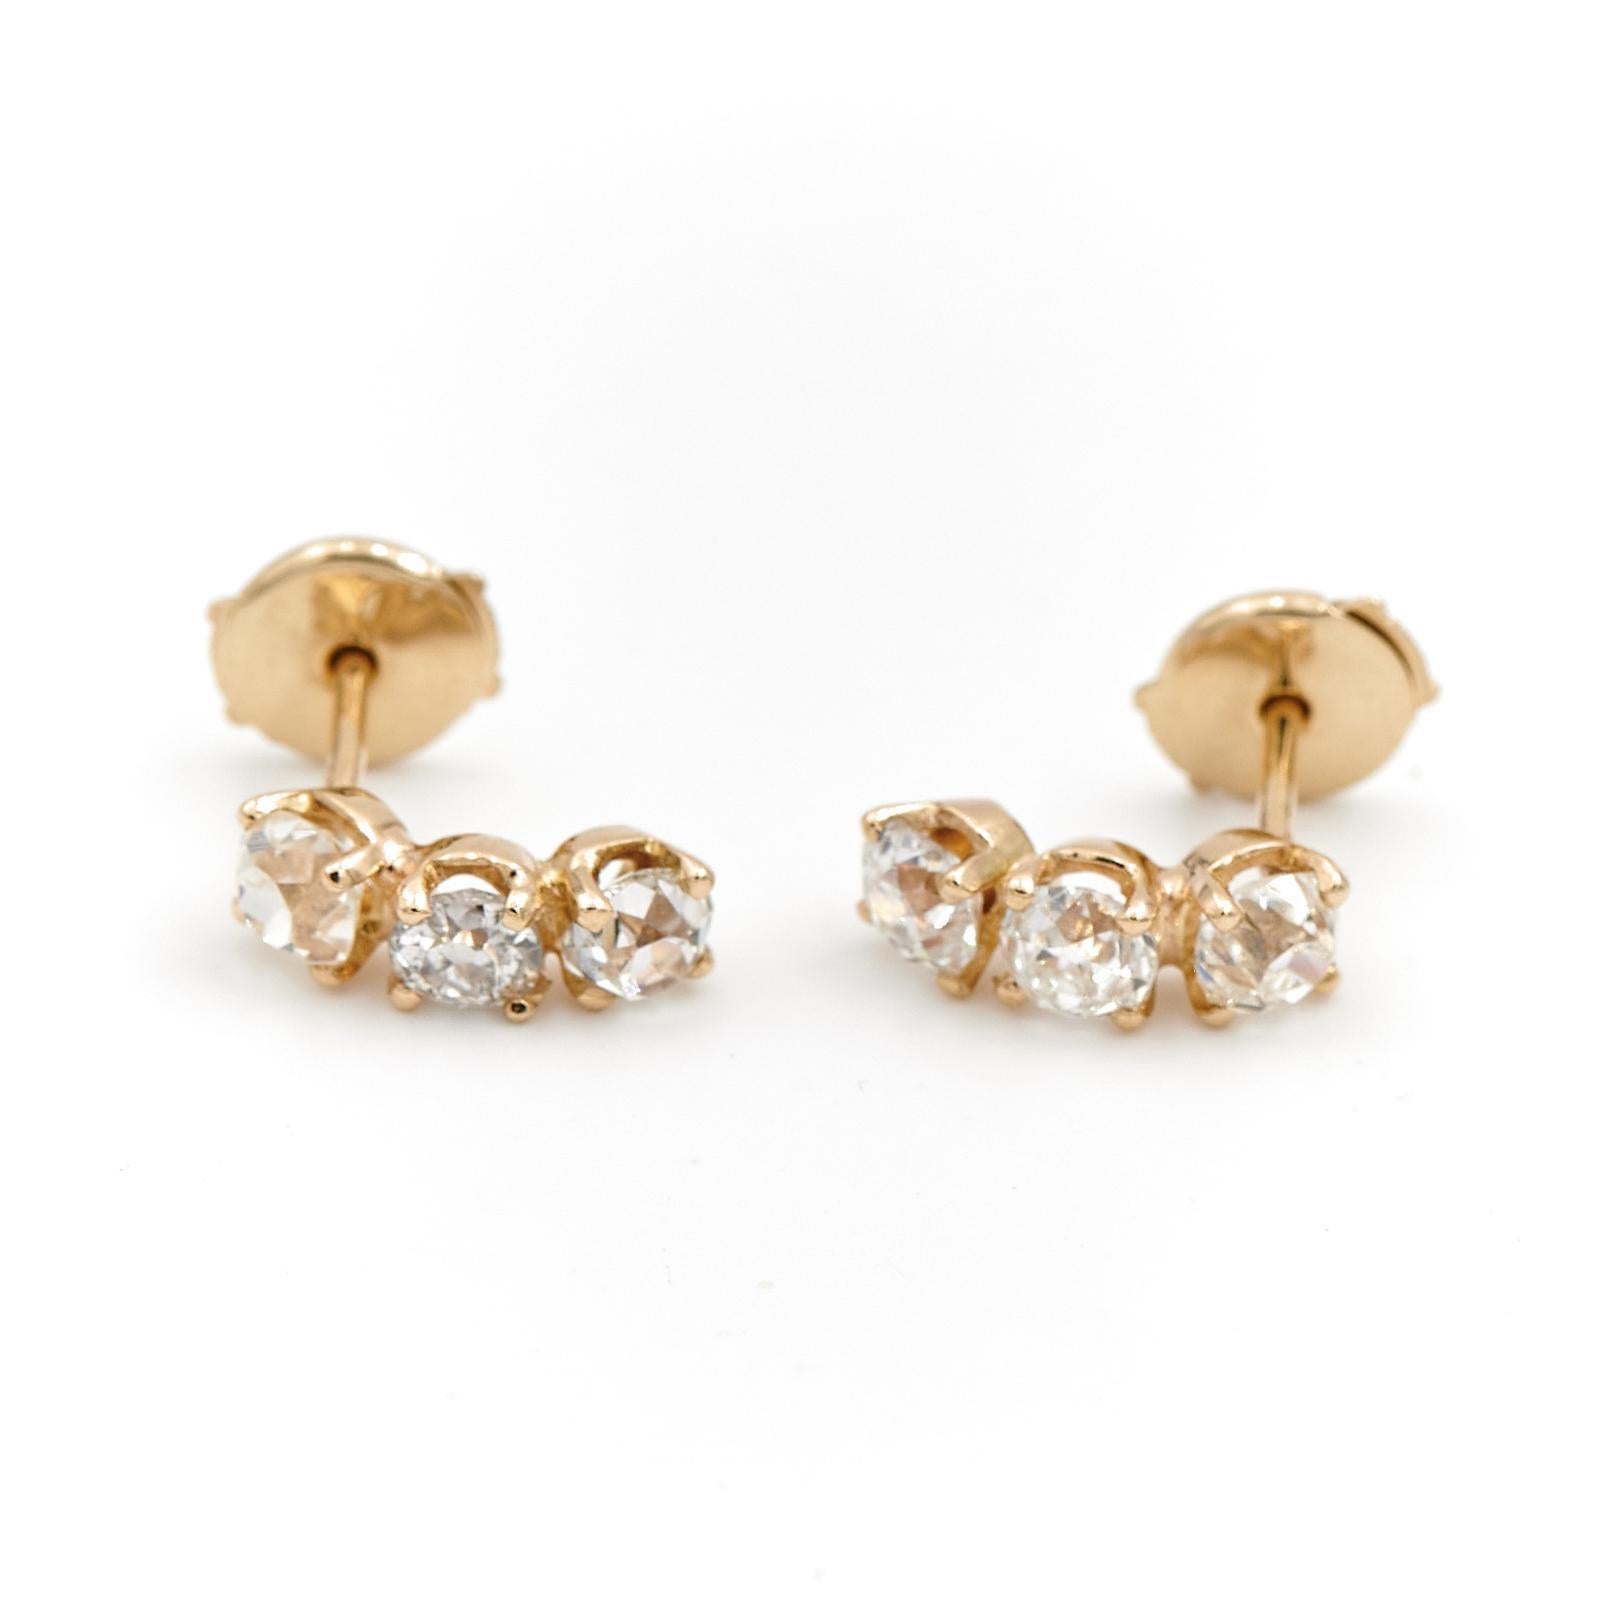 Pair of earrings in yellow gold 750 thousandths (18 carats) tested. 6 antique cut diamonds. about 0.23 ct each. total diamond weight: 1.38 cts. alpa clasp. dimensions: 1.30 cm x 0.43 cm. total weight: 3.08 g. excellent condition

